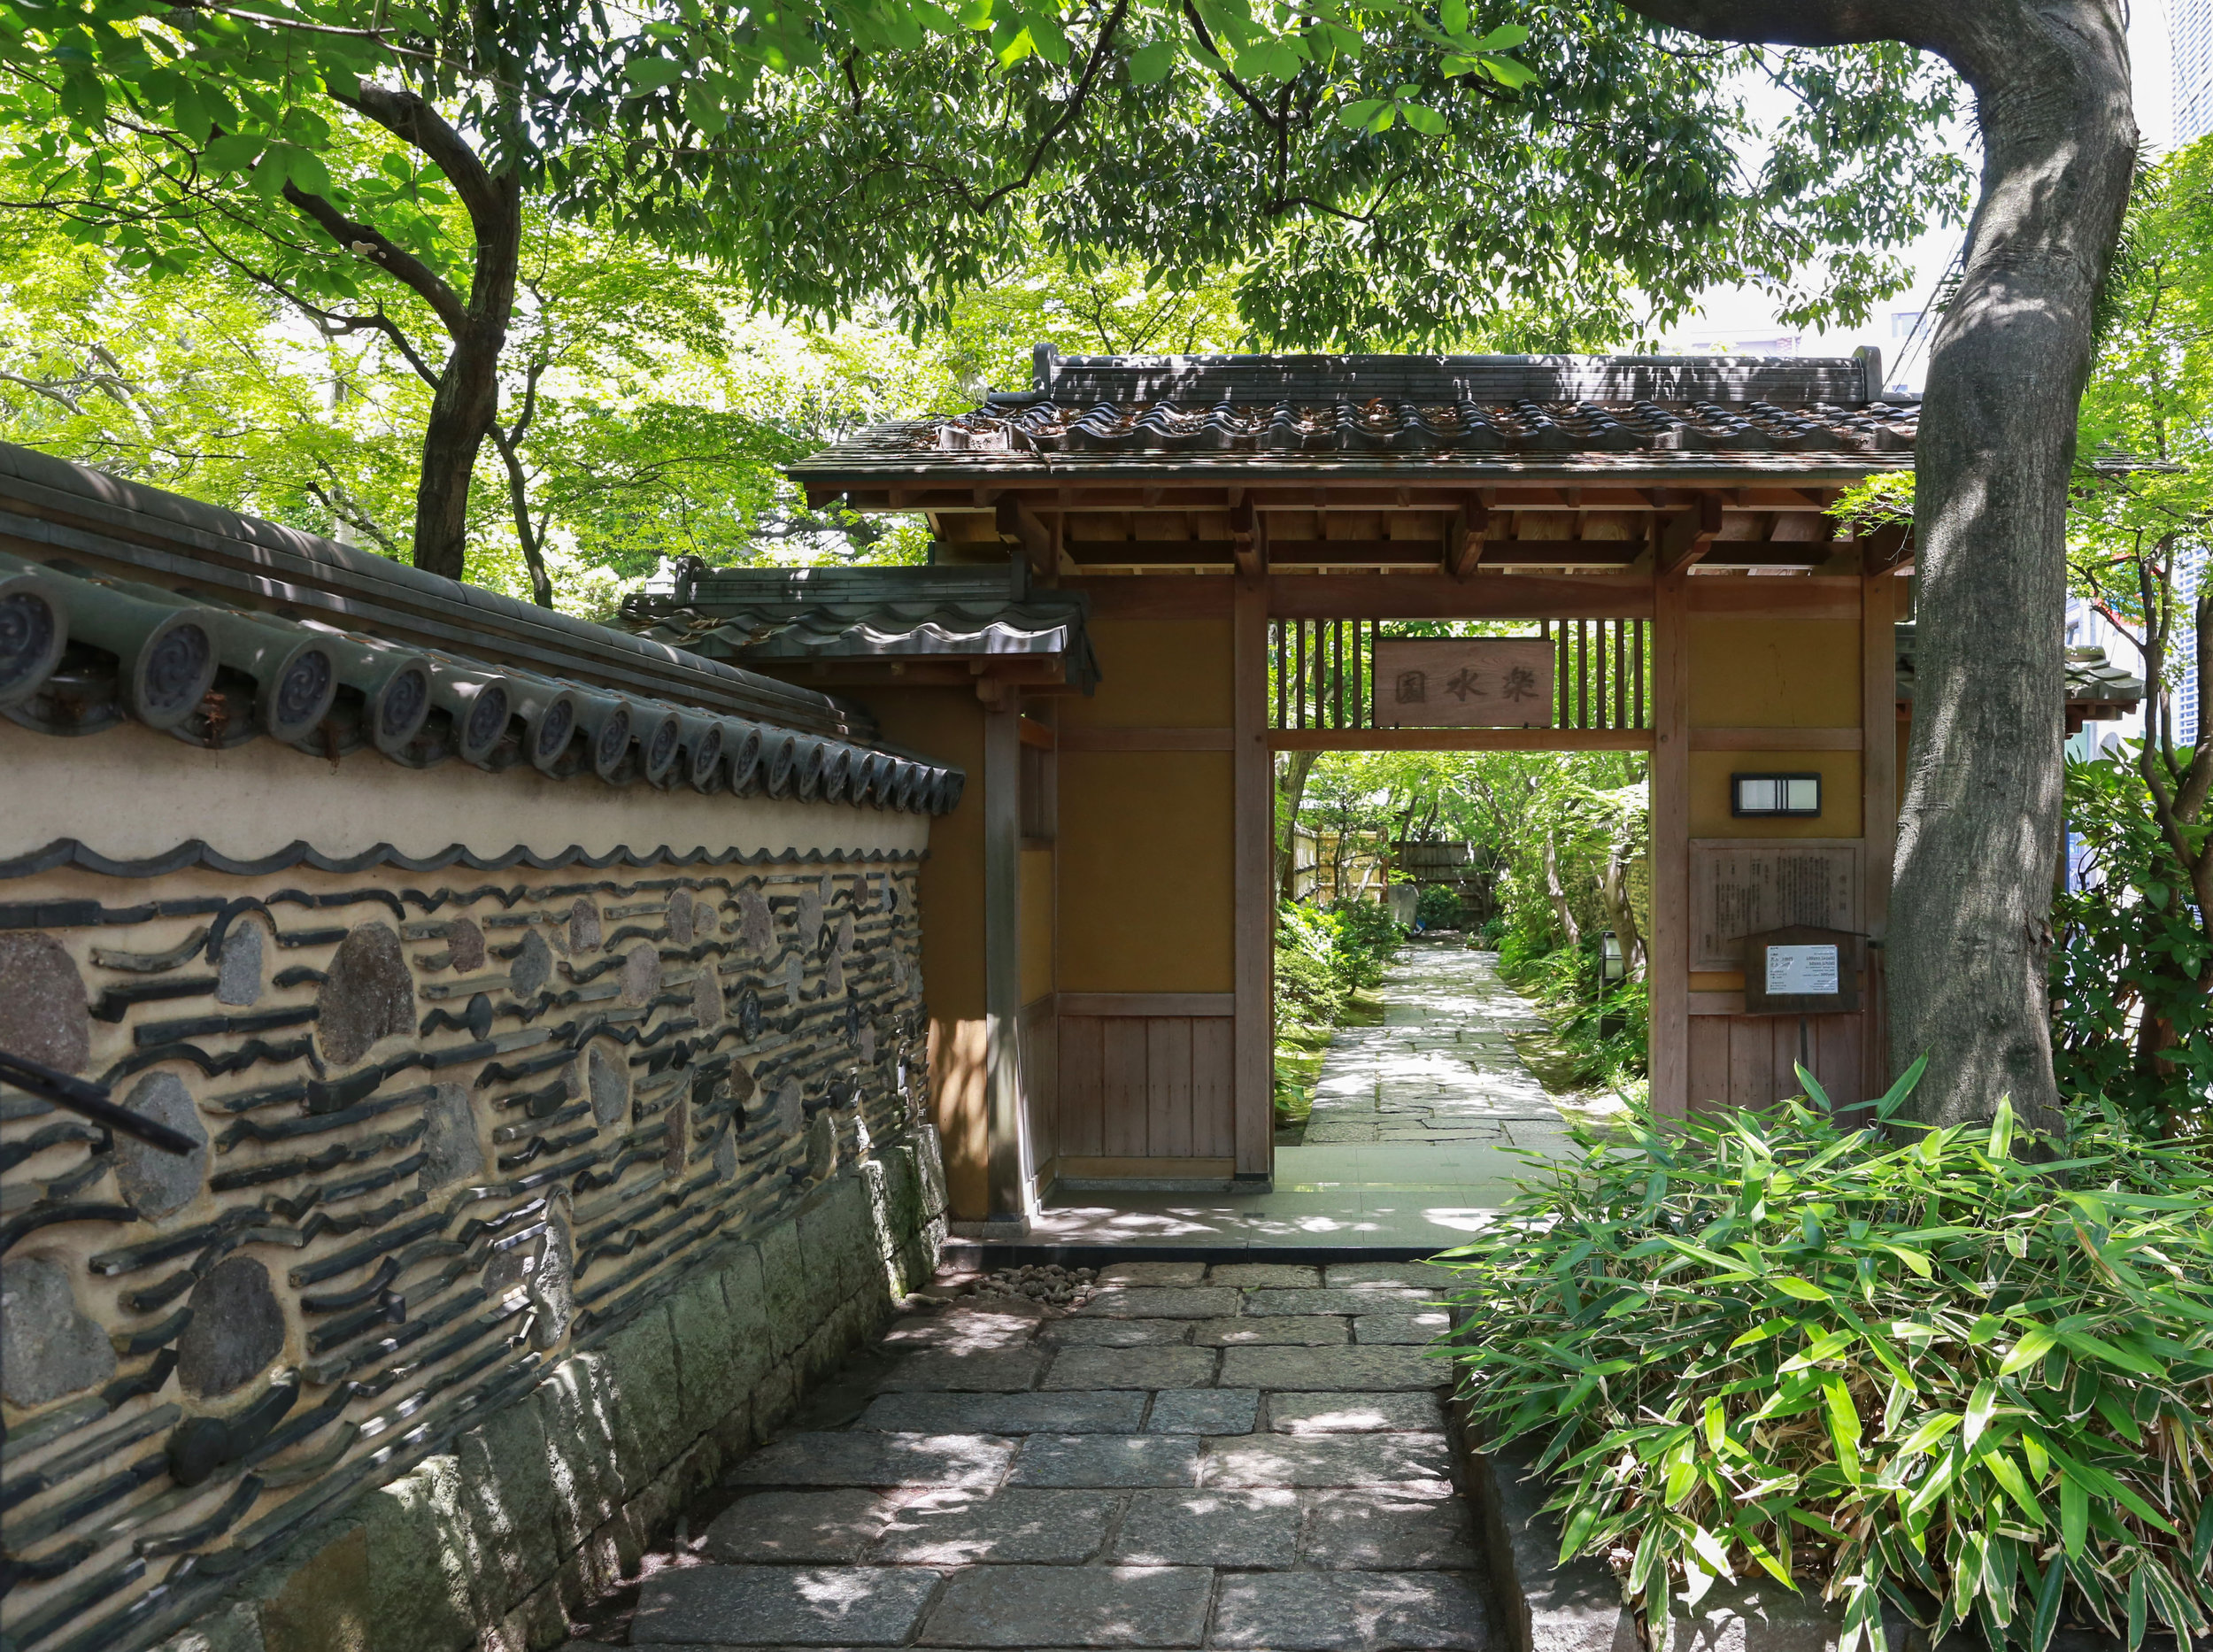  The entry gate of Rakusui-en, a garden and teahouse that was once the mansion of a Hakata merchant 100 years ago, in Fukuoka, Japan, June 22, 2018. 